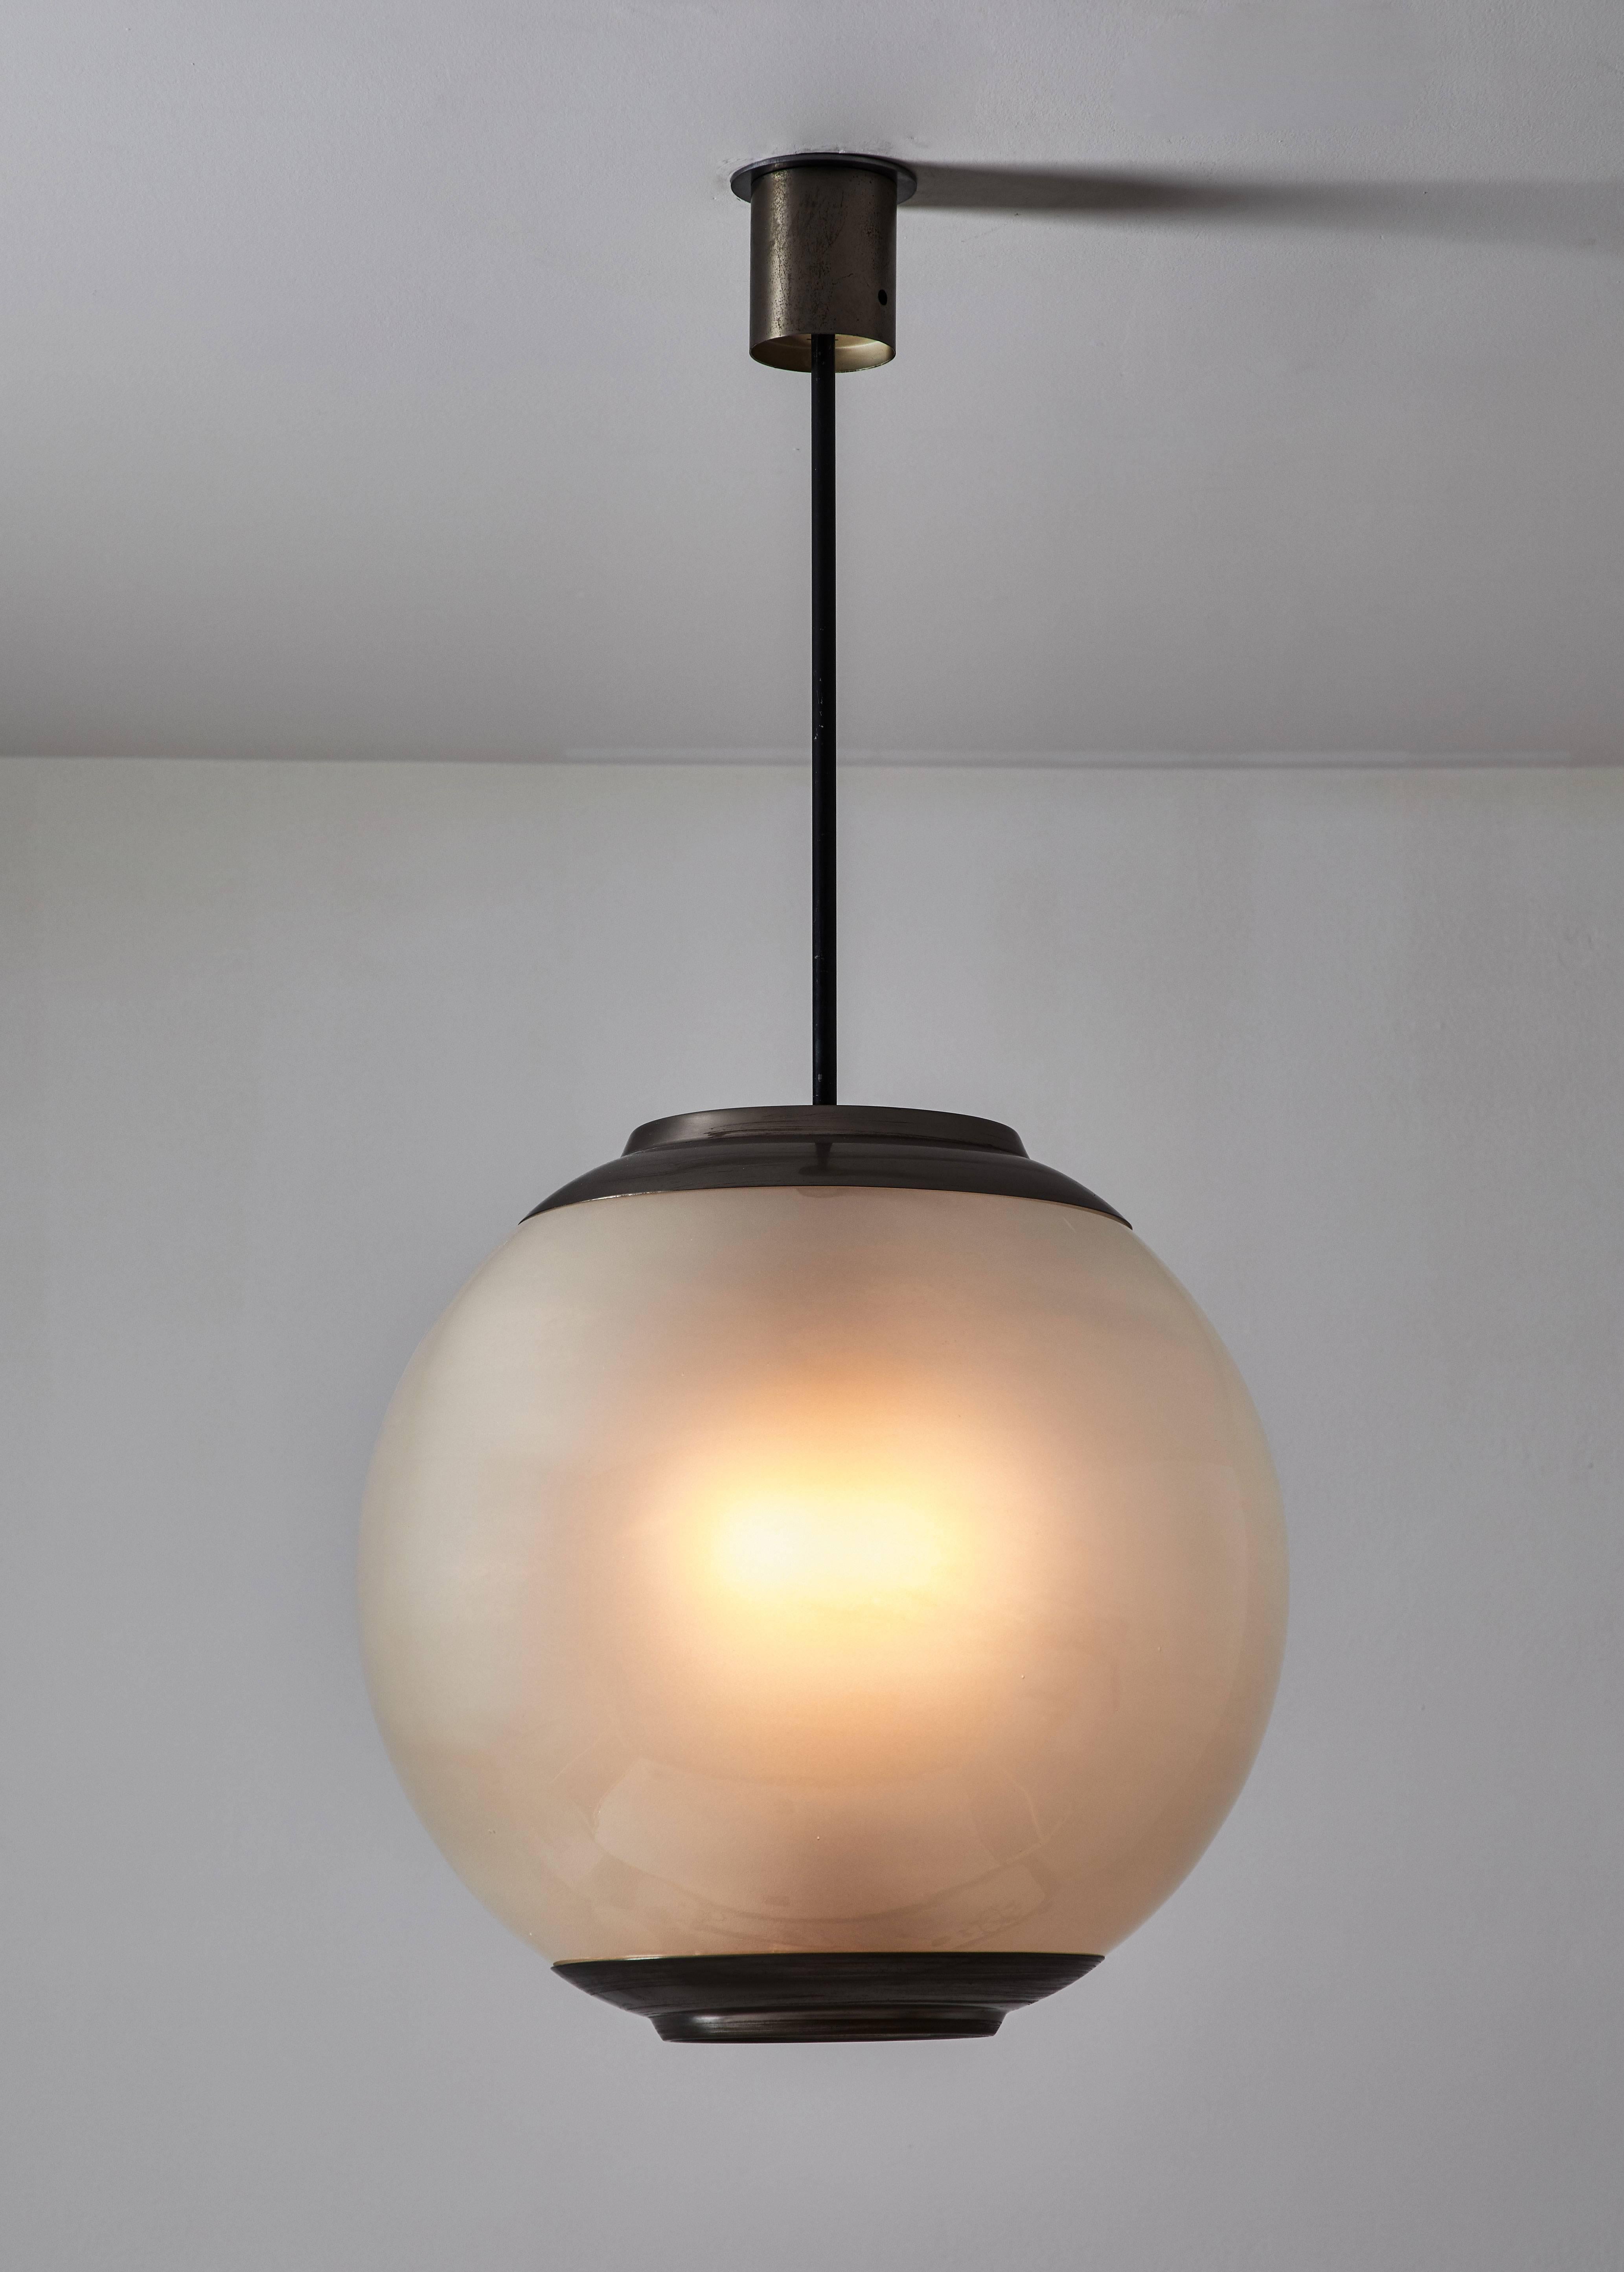 Large Model LS2 Pendant by Luigi Caccia Dominioni for Azucena. Designed and manufactured in Italy circa 1950's. This model is no longer being reproduced. Nickel-plated brass, polished glass diffuser that has been sanded on the inside. Wired for US